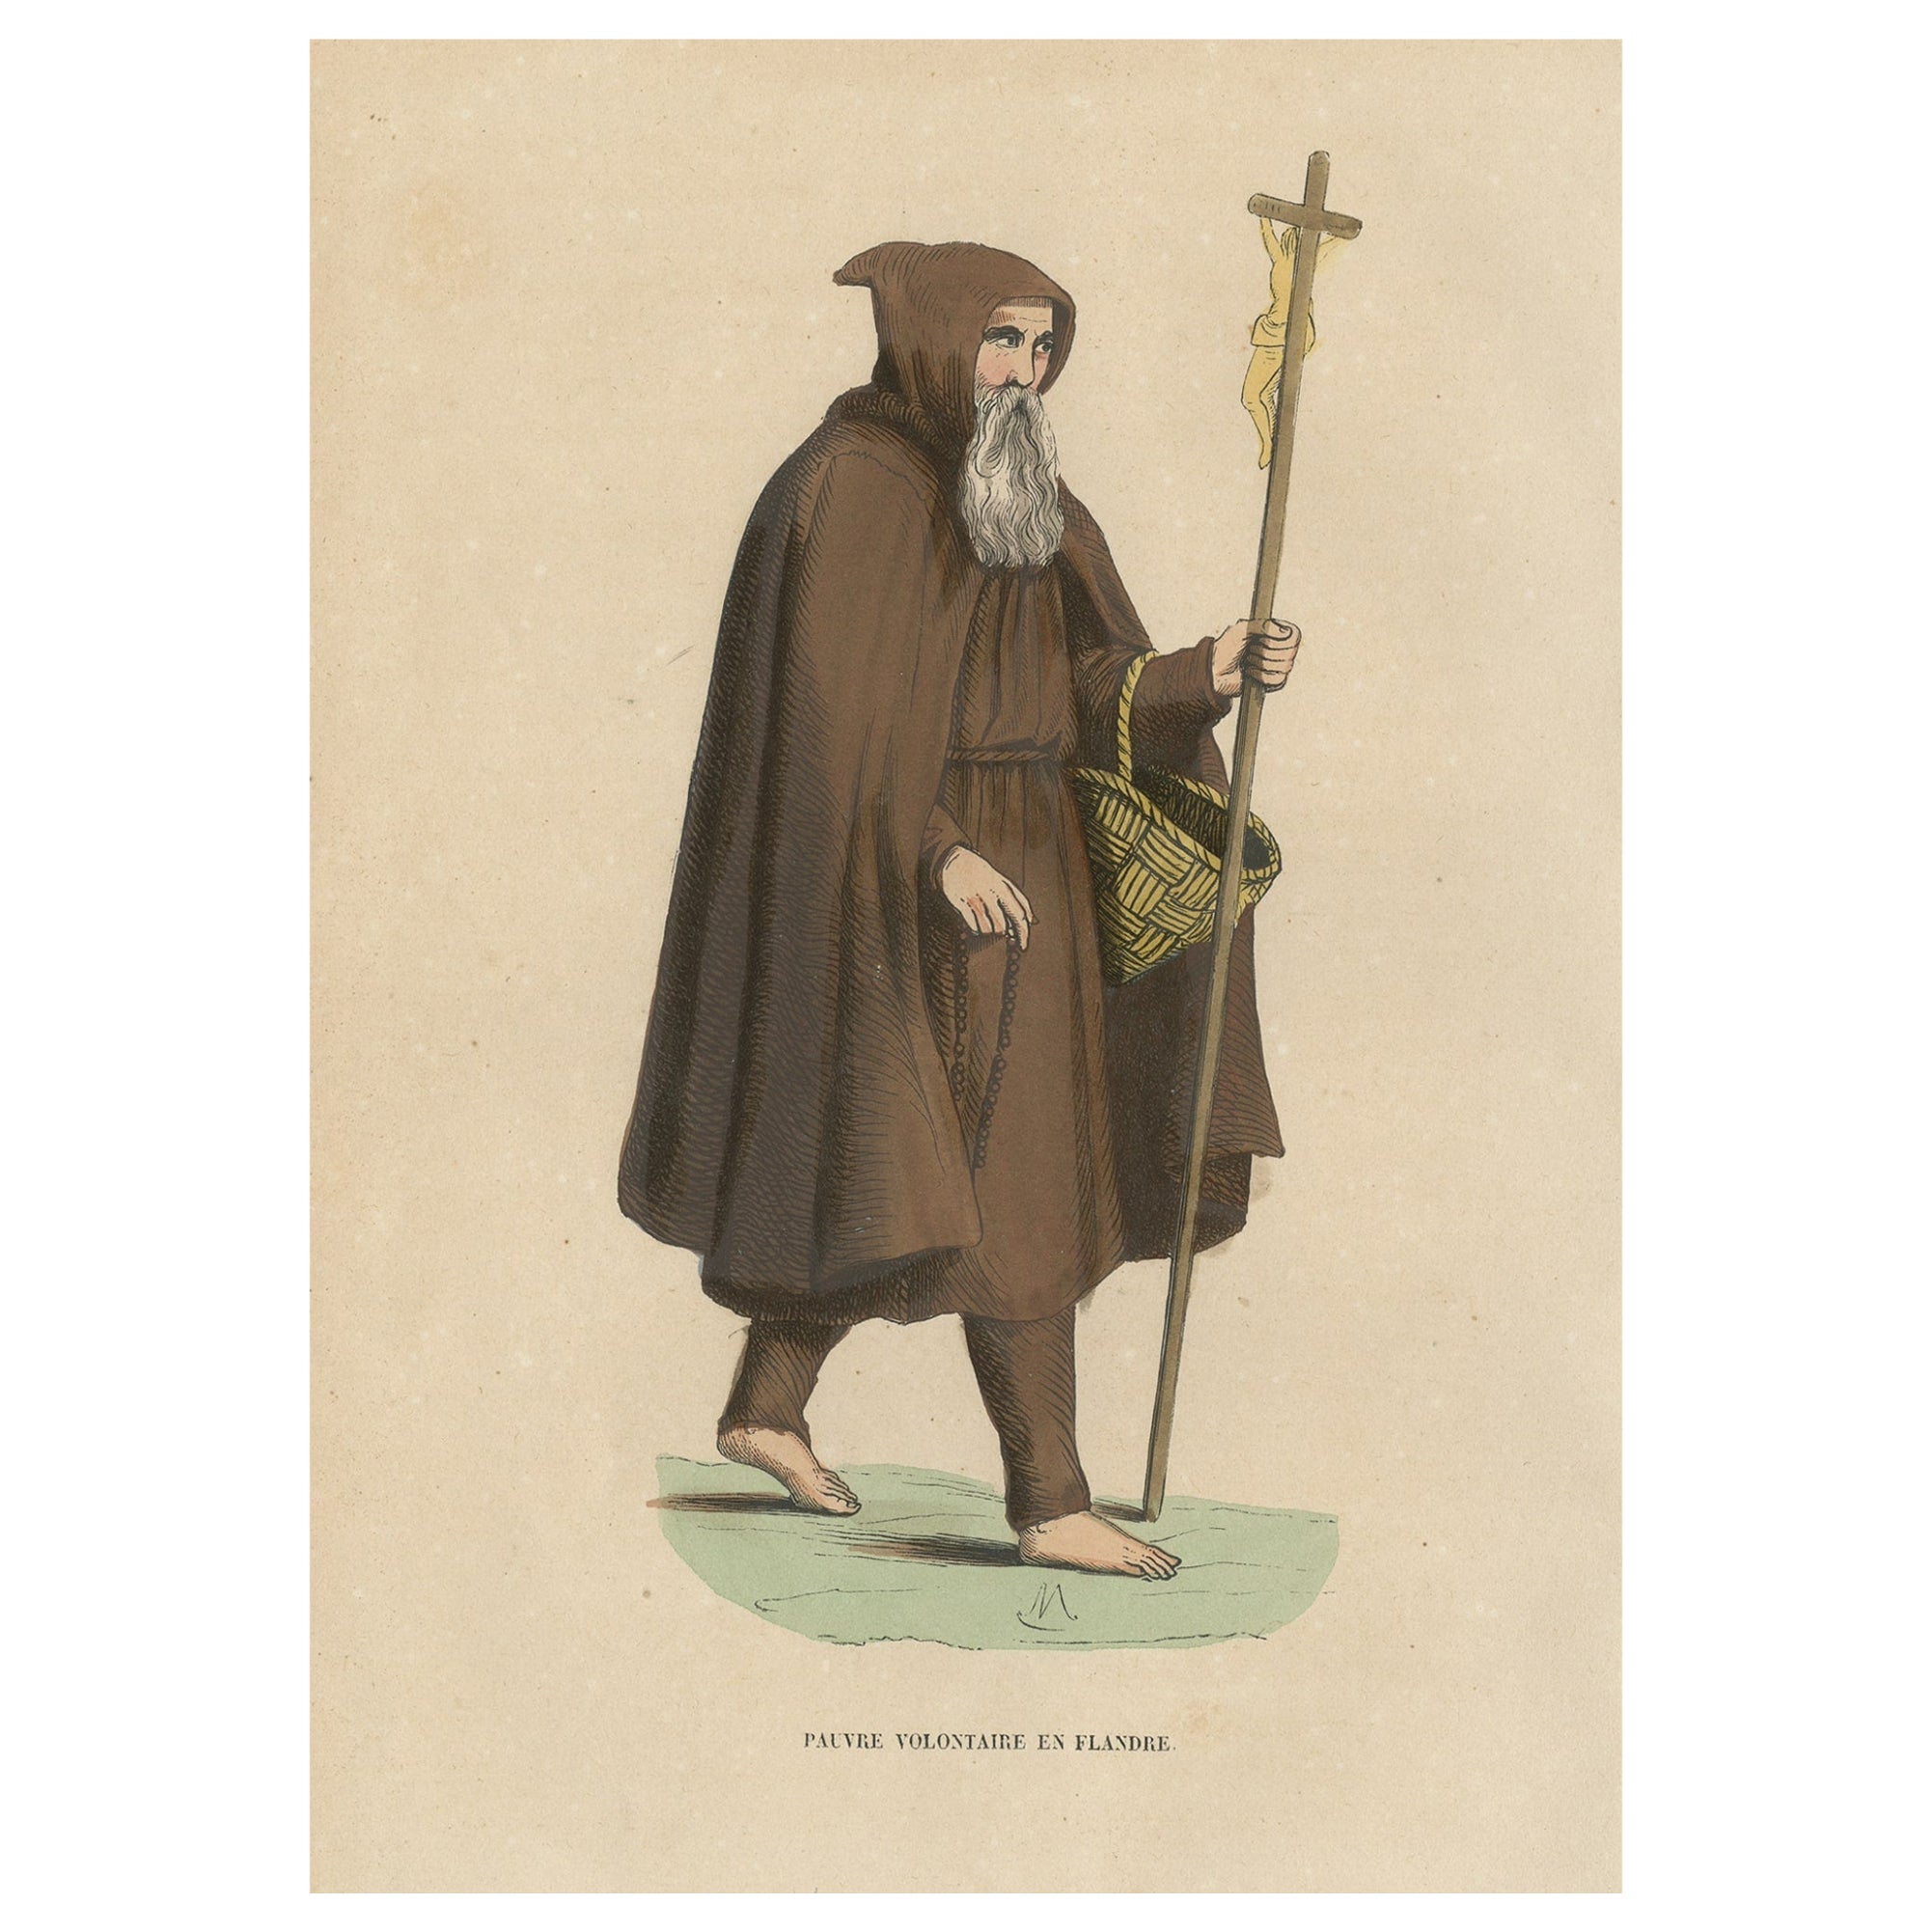 Print of a Monk of the Order of Poor Volunteers with Crucifix, 1845